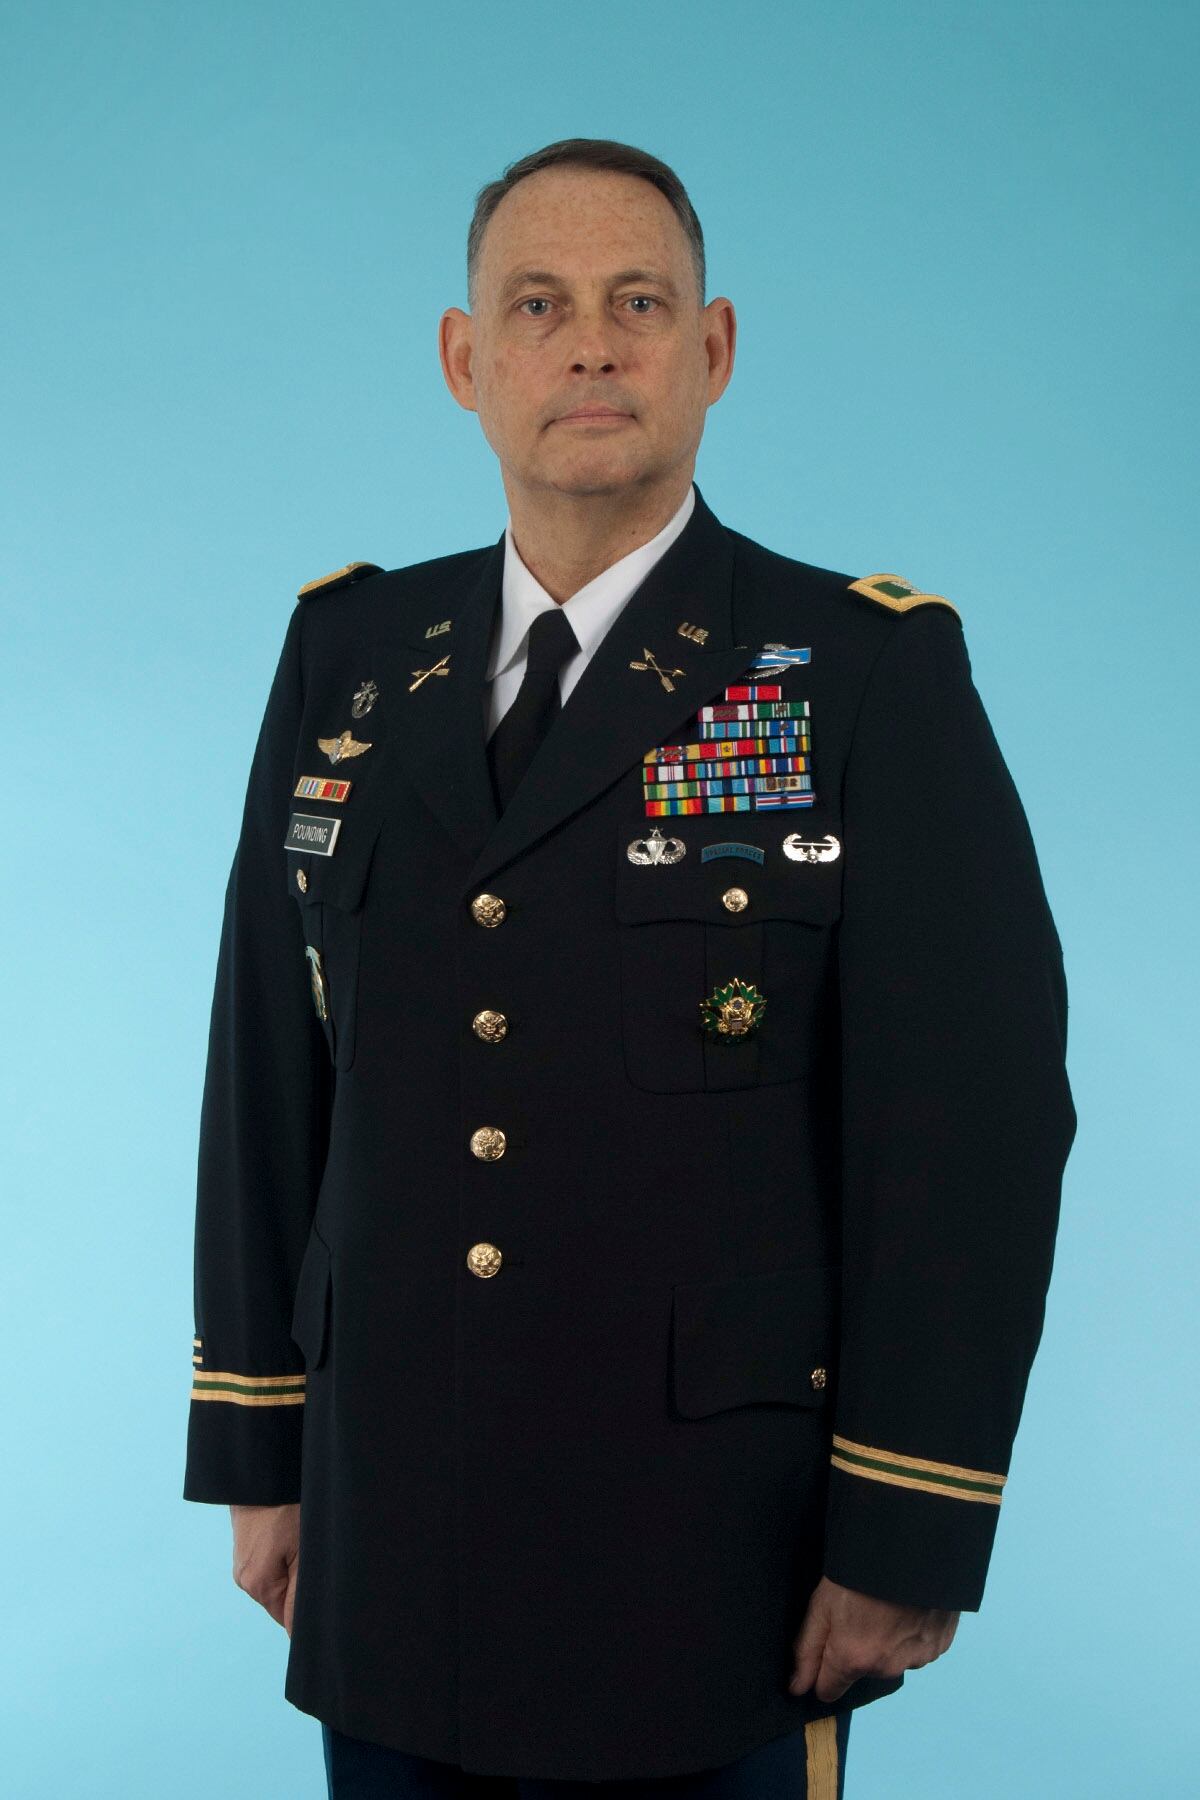 Army dismisses charges against colonel in HIV case